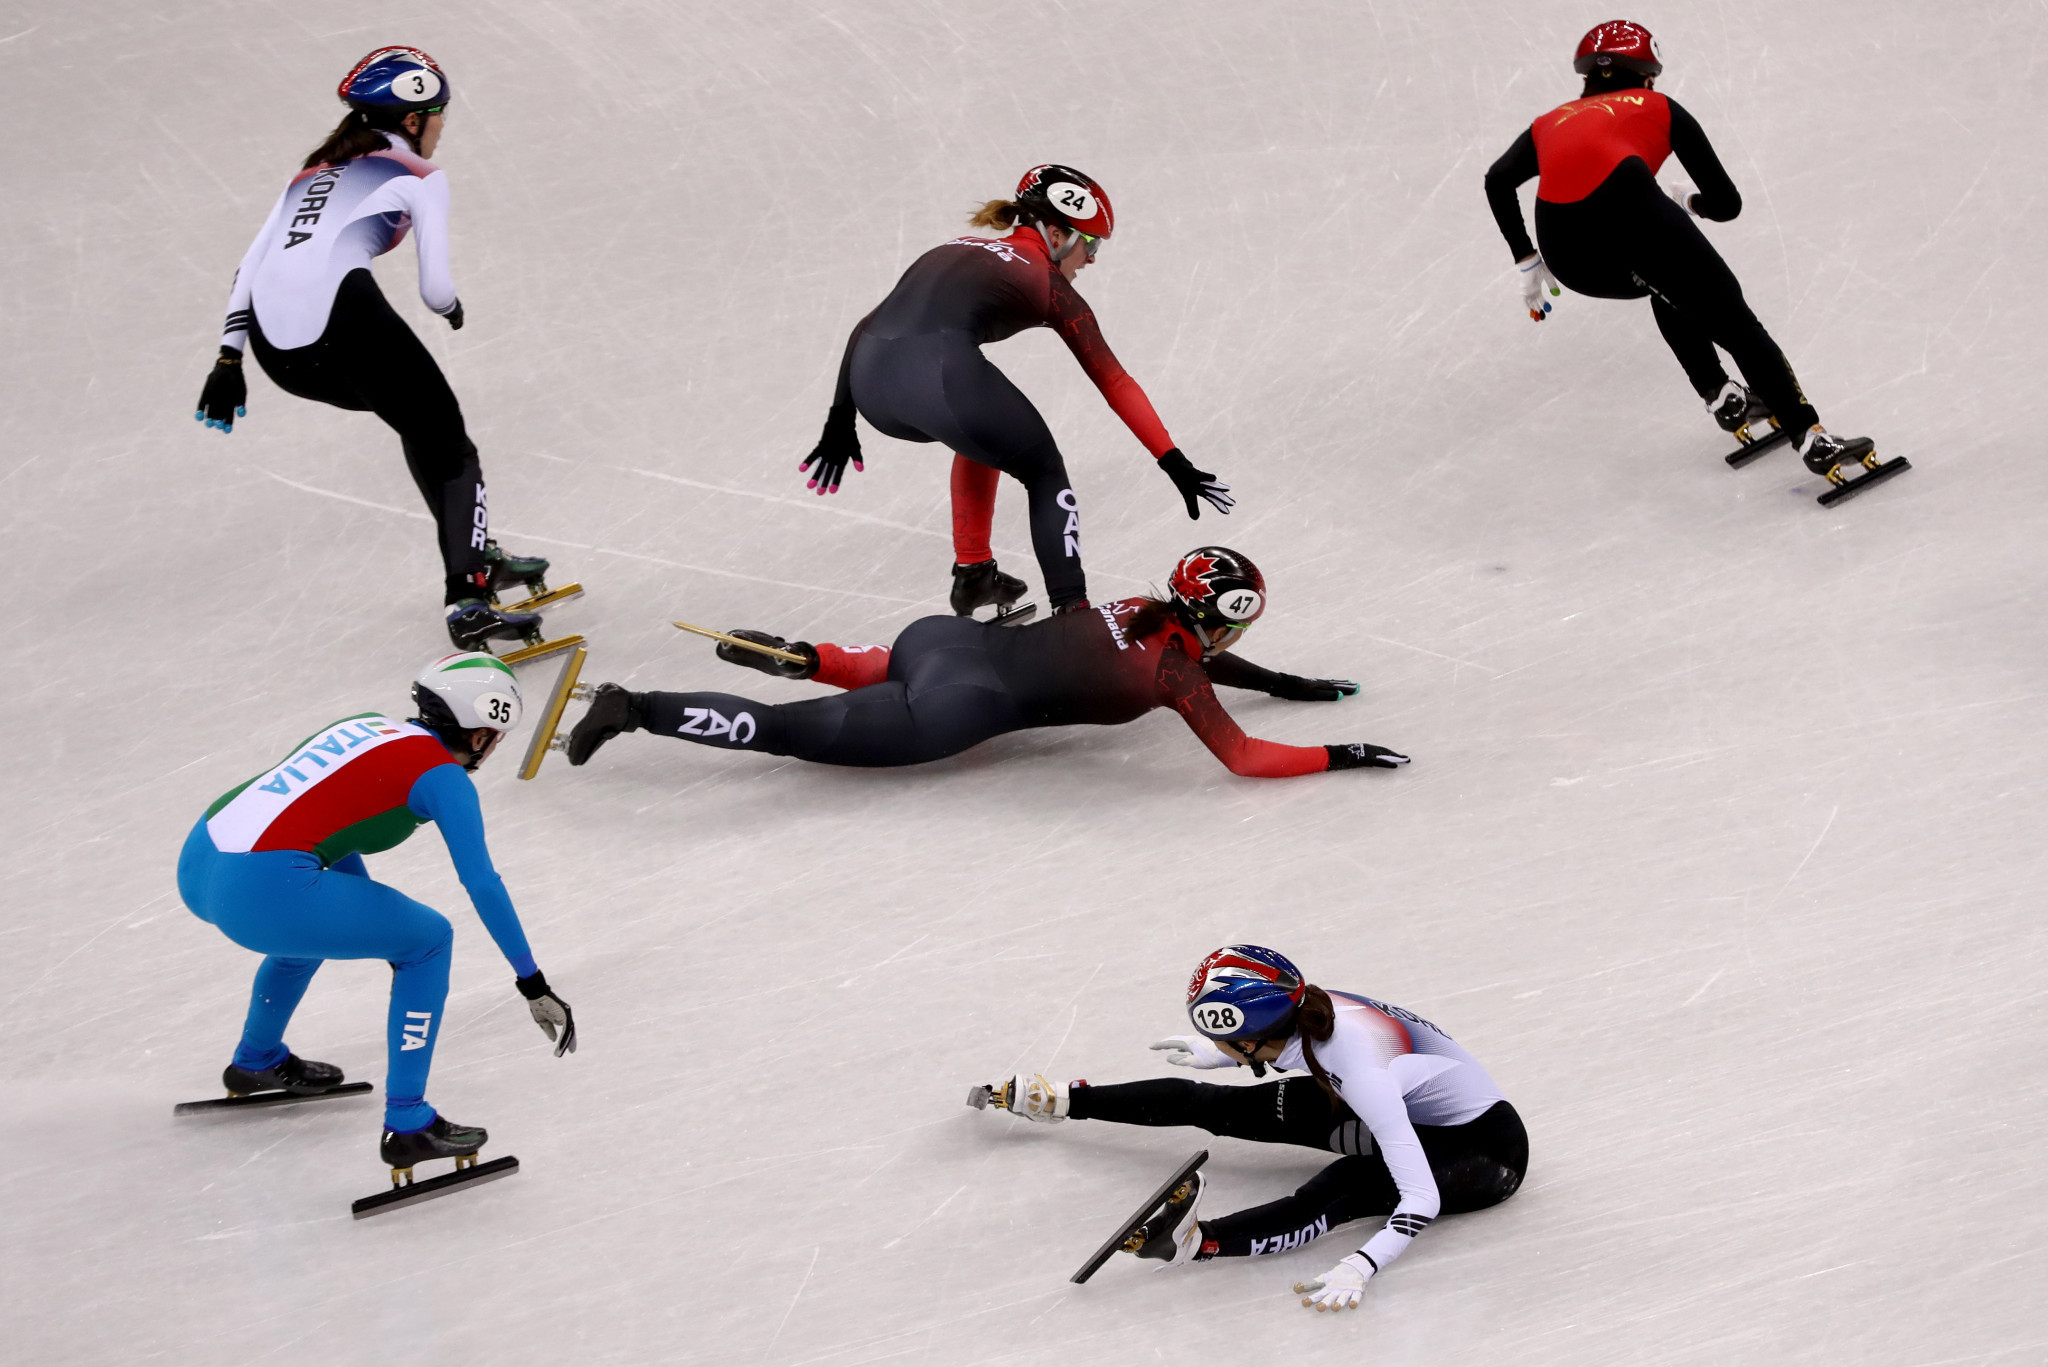 The women's 3,000m short track relay proved to be a chaotic affair ©Getty Images